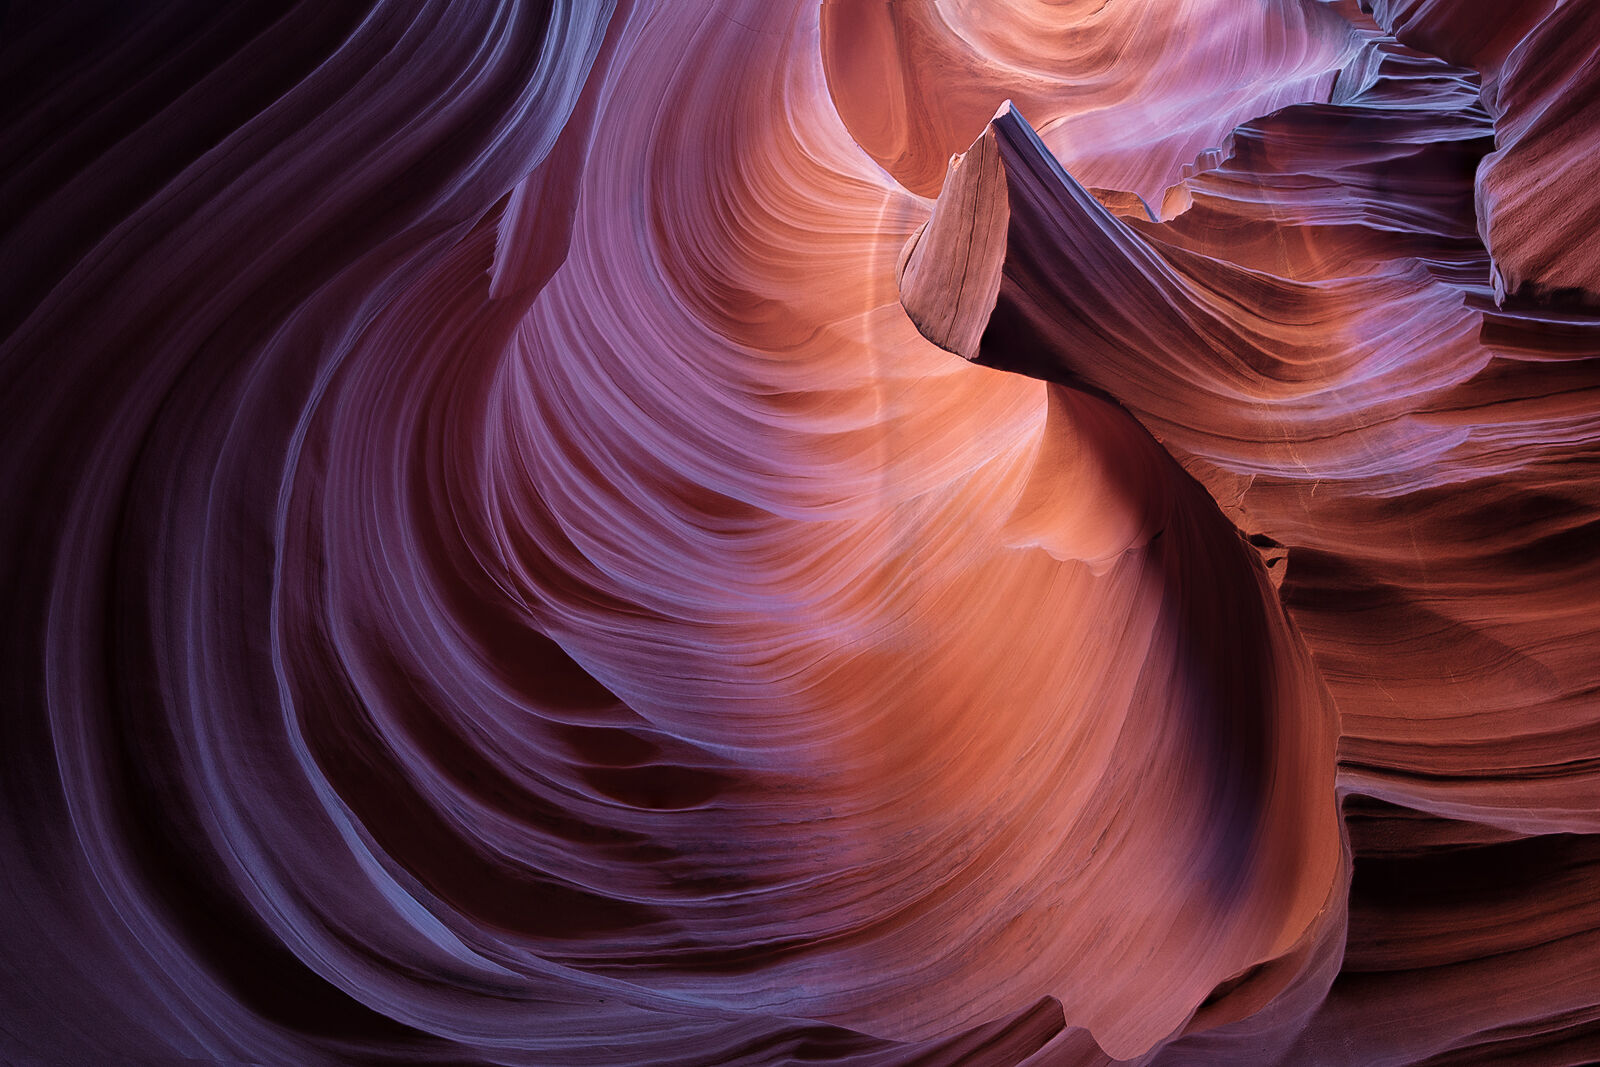 Beautiful slot canyon artistry warmed up with mid morning bounce light.